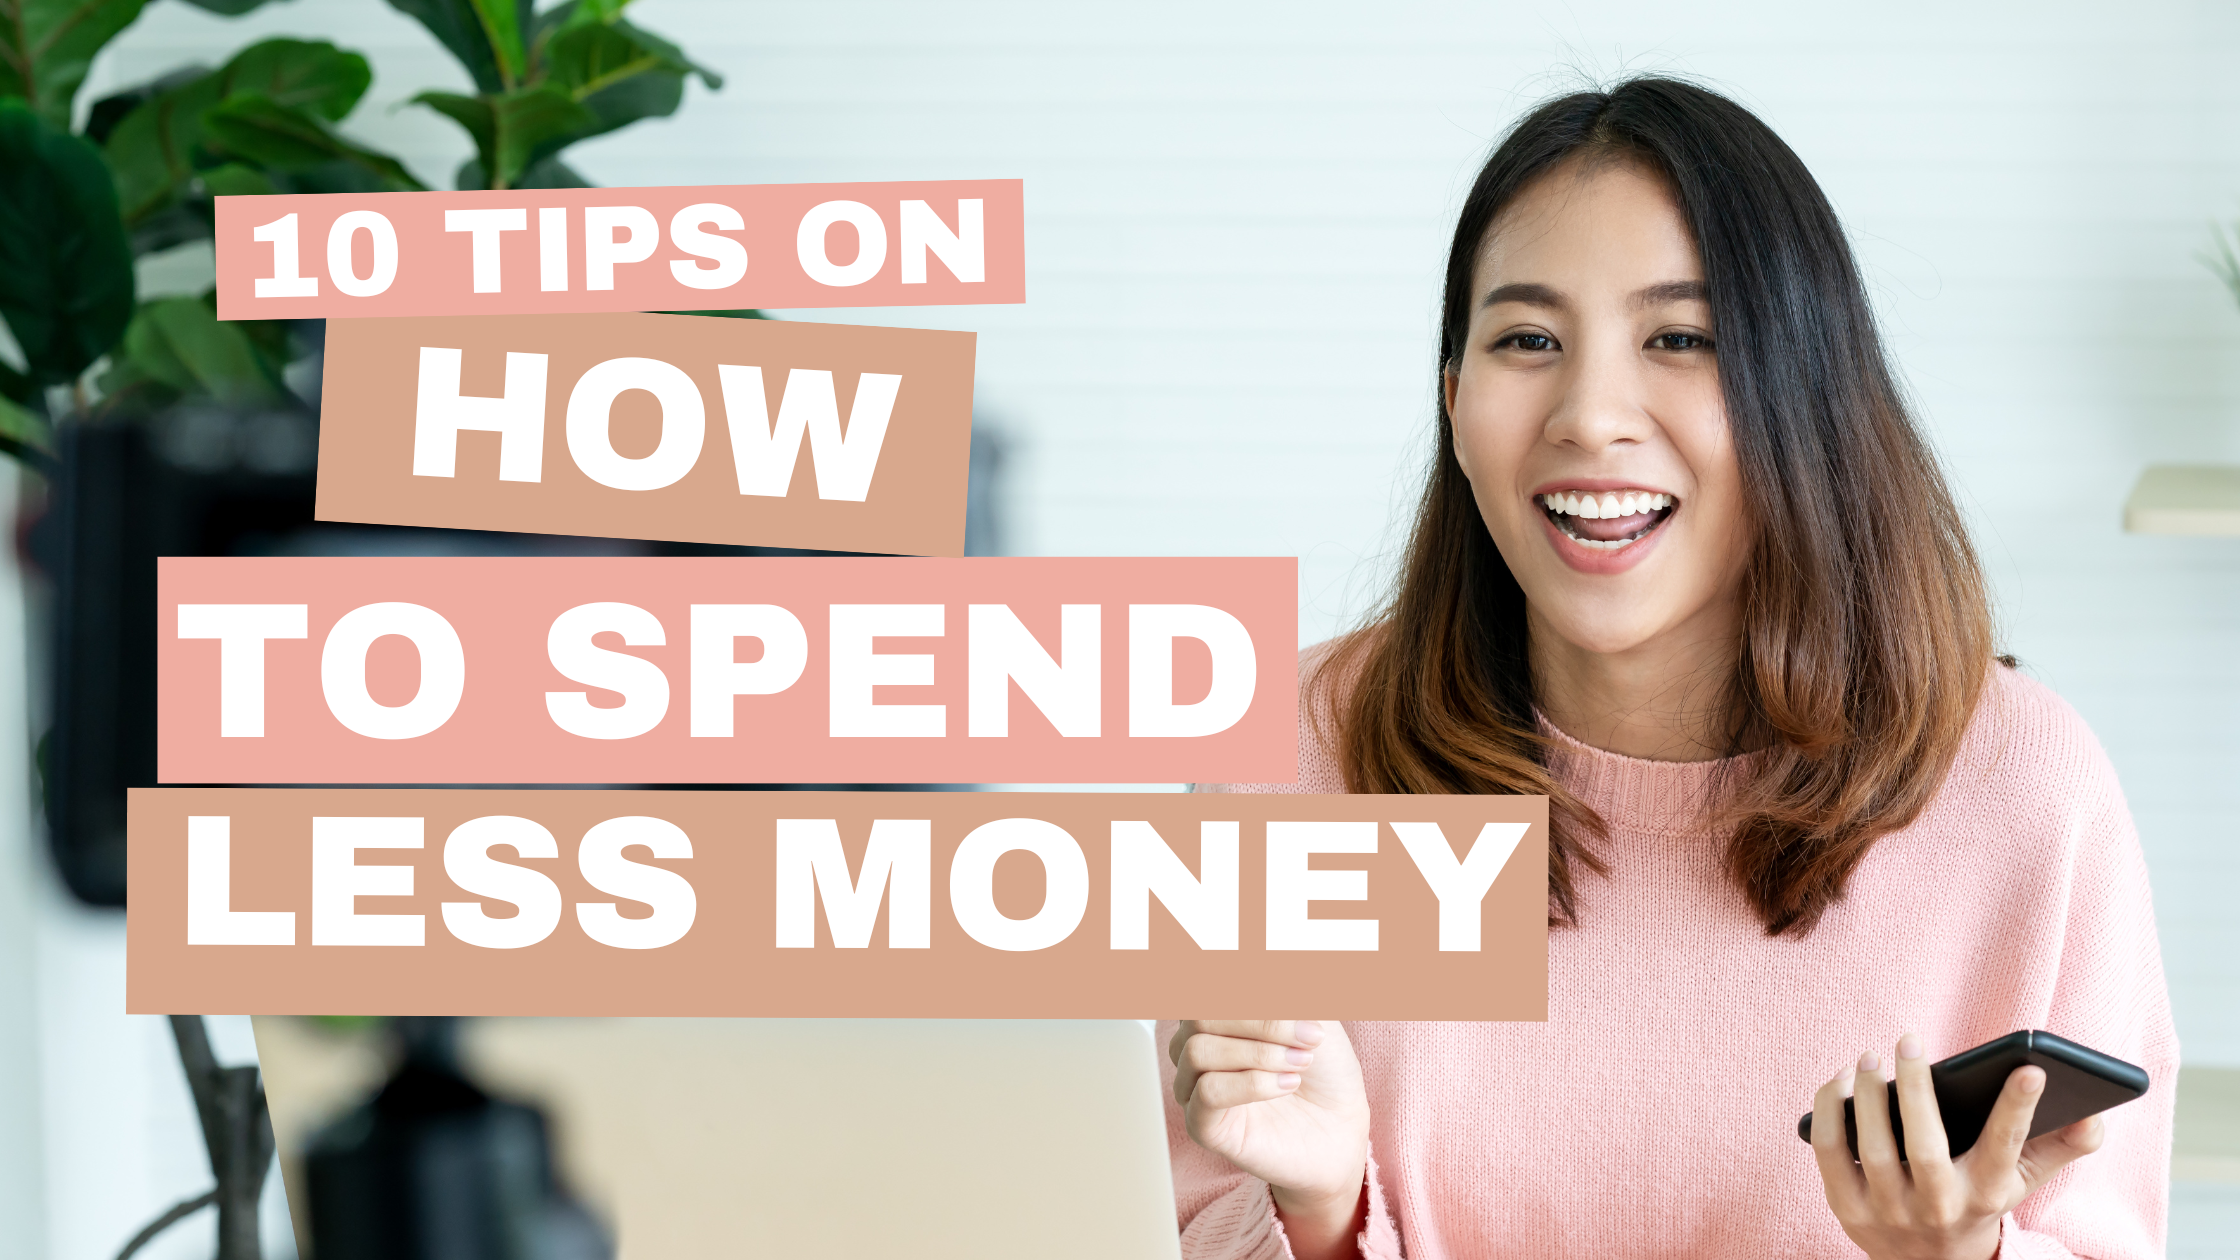 10 Tips On How To Spend Less Money Header